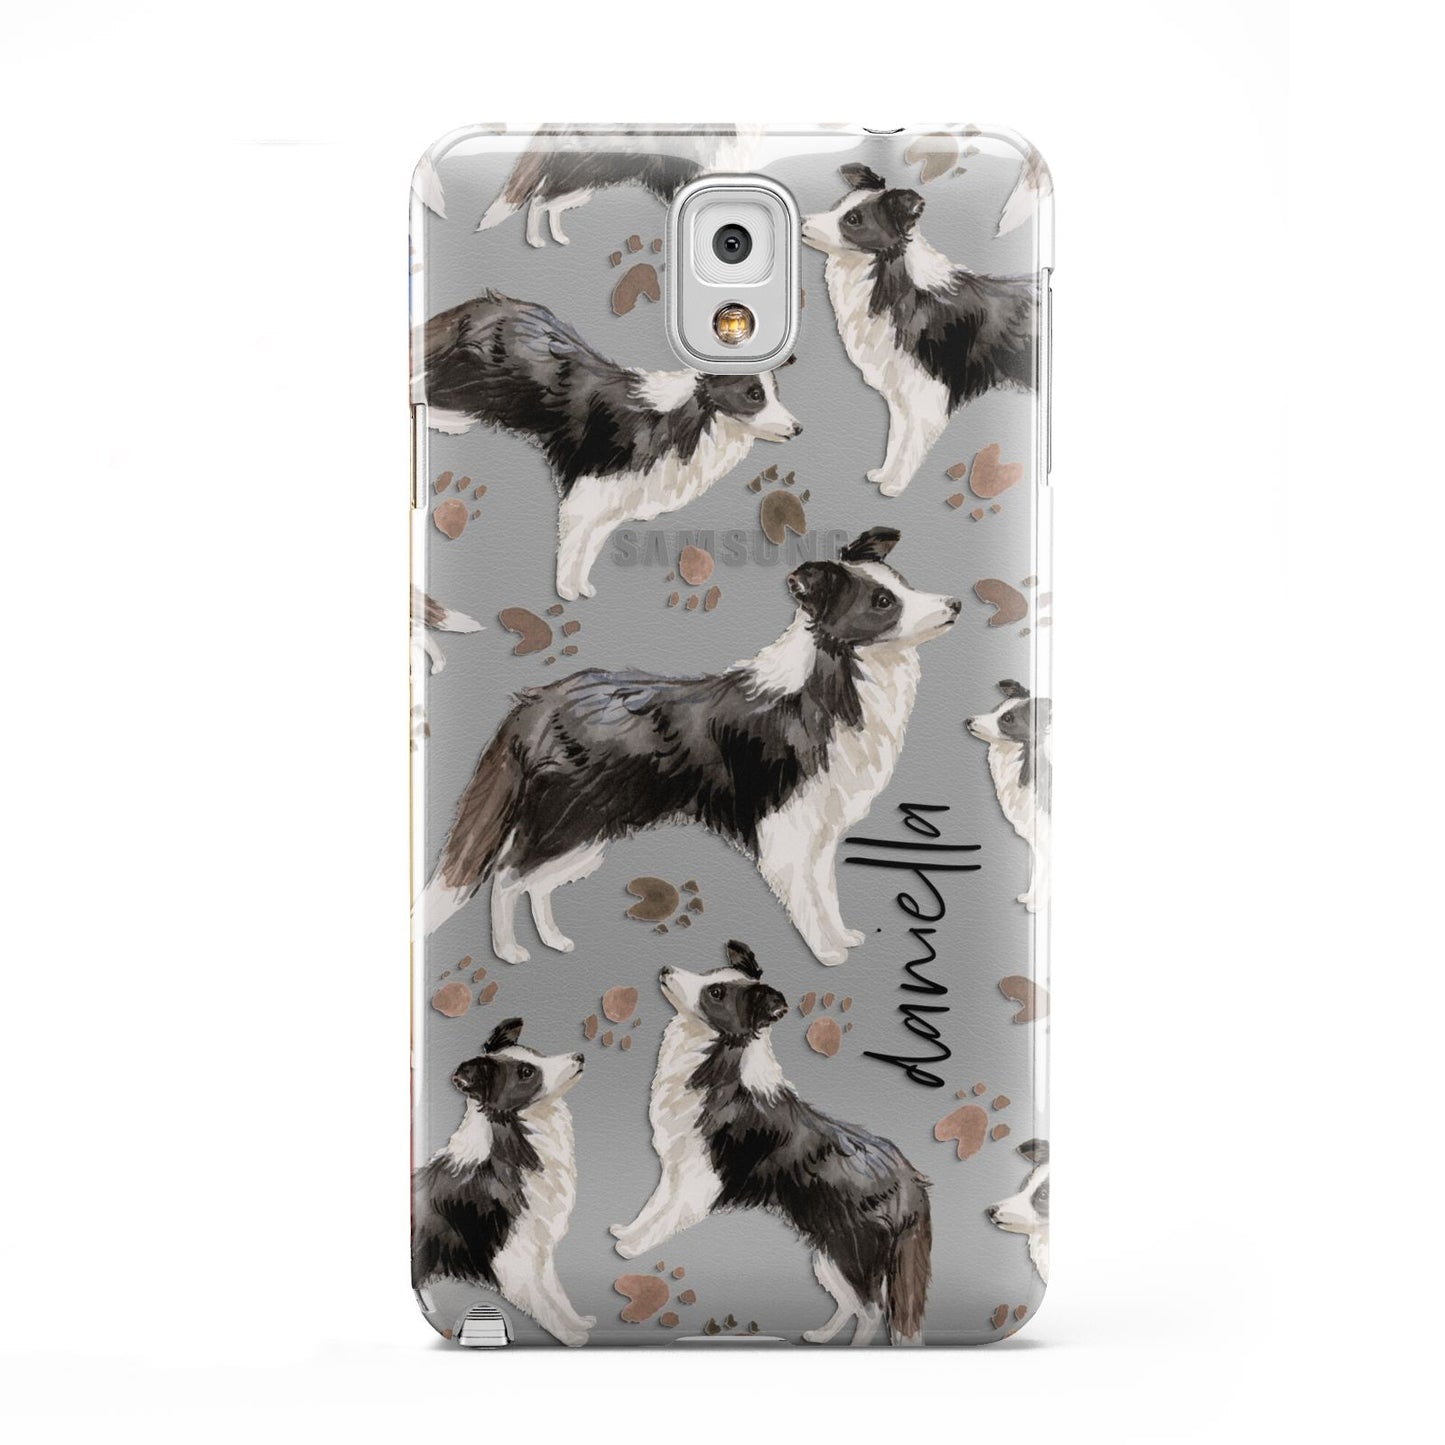 Personalised Border Collie Dog Samsung Galaxy Note 3 Case